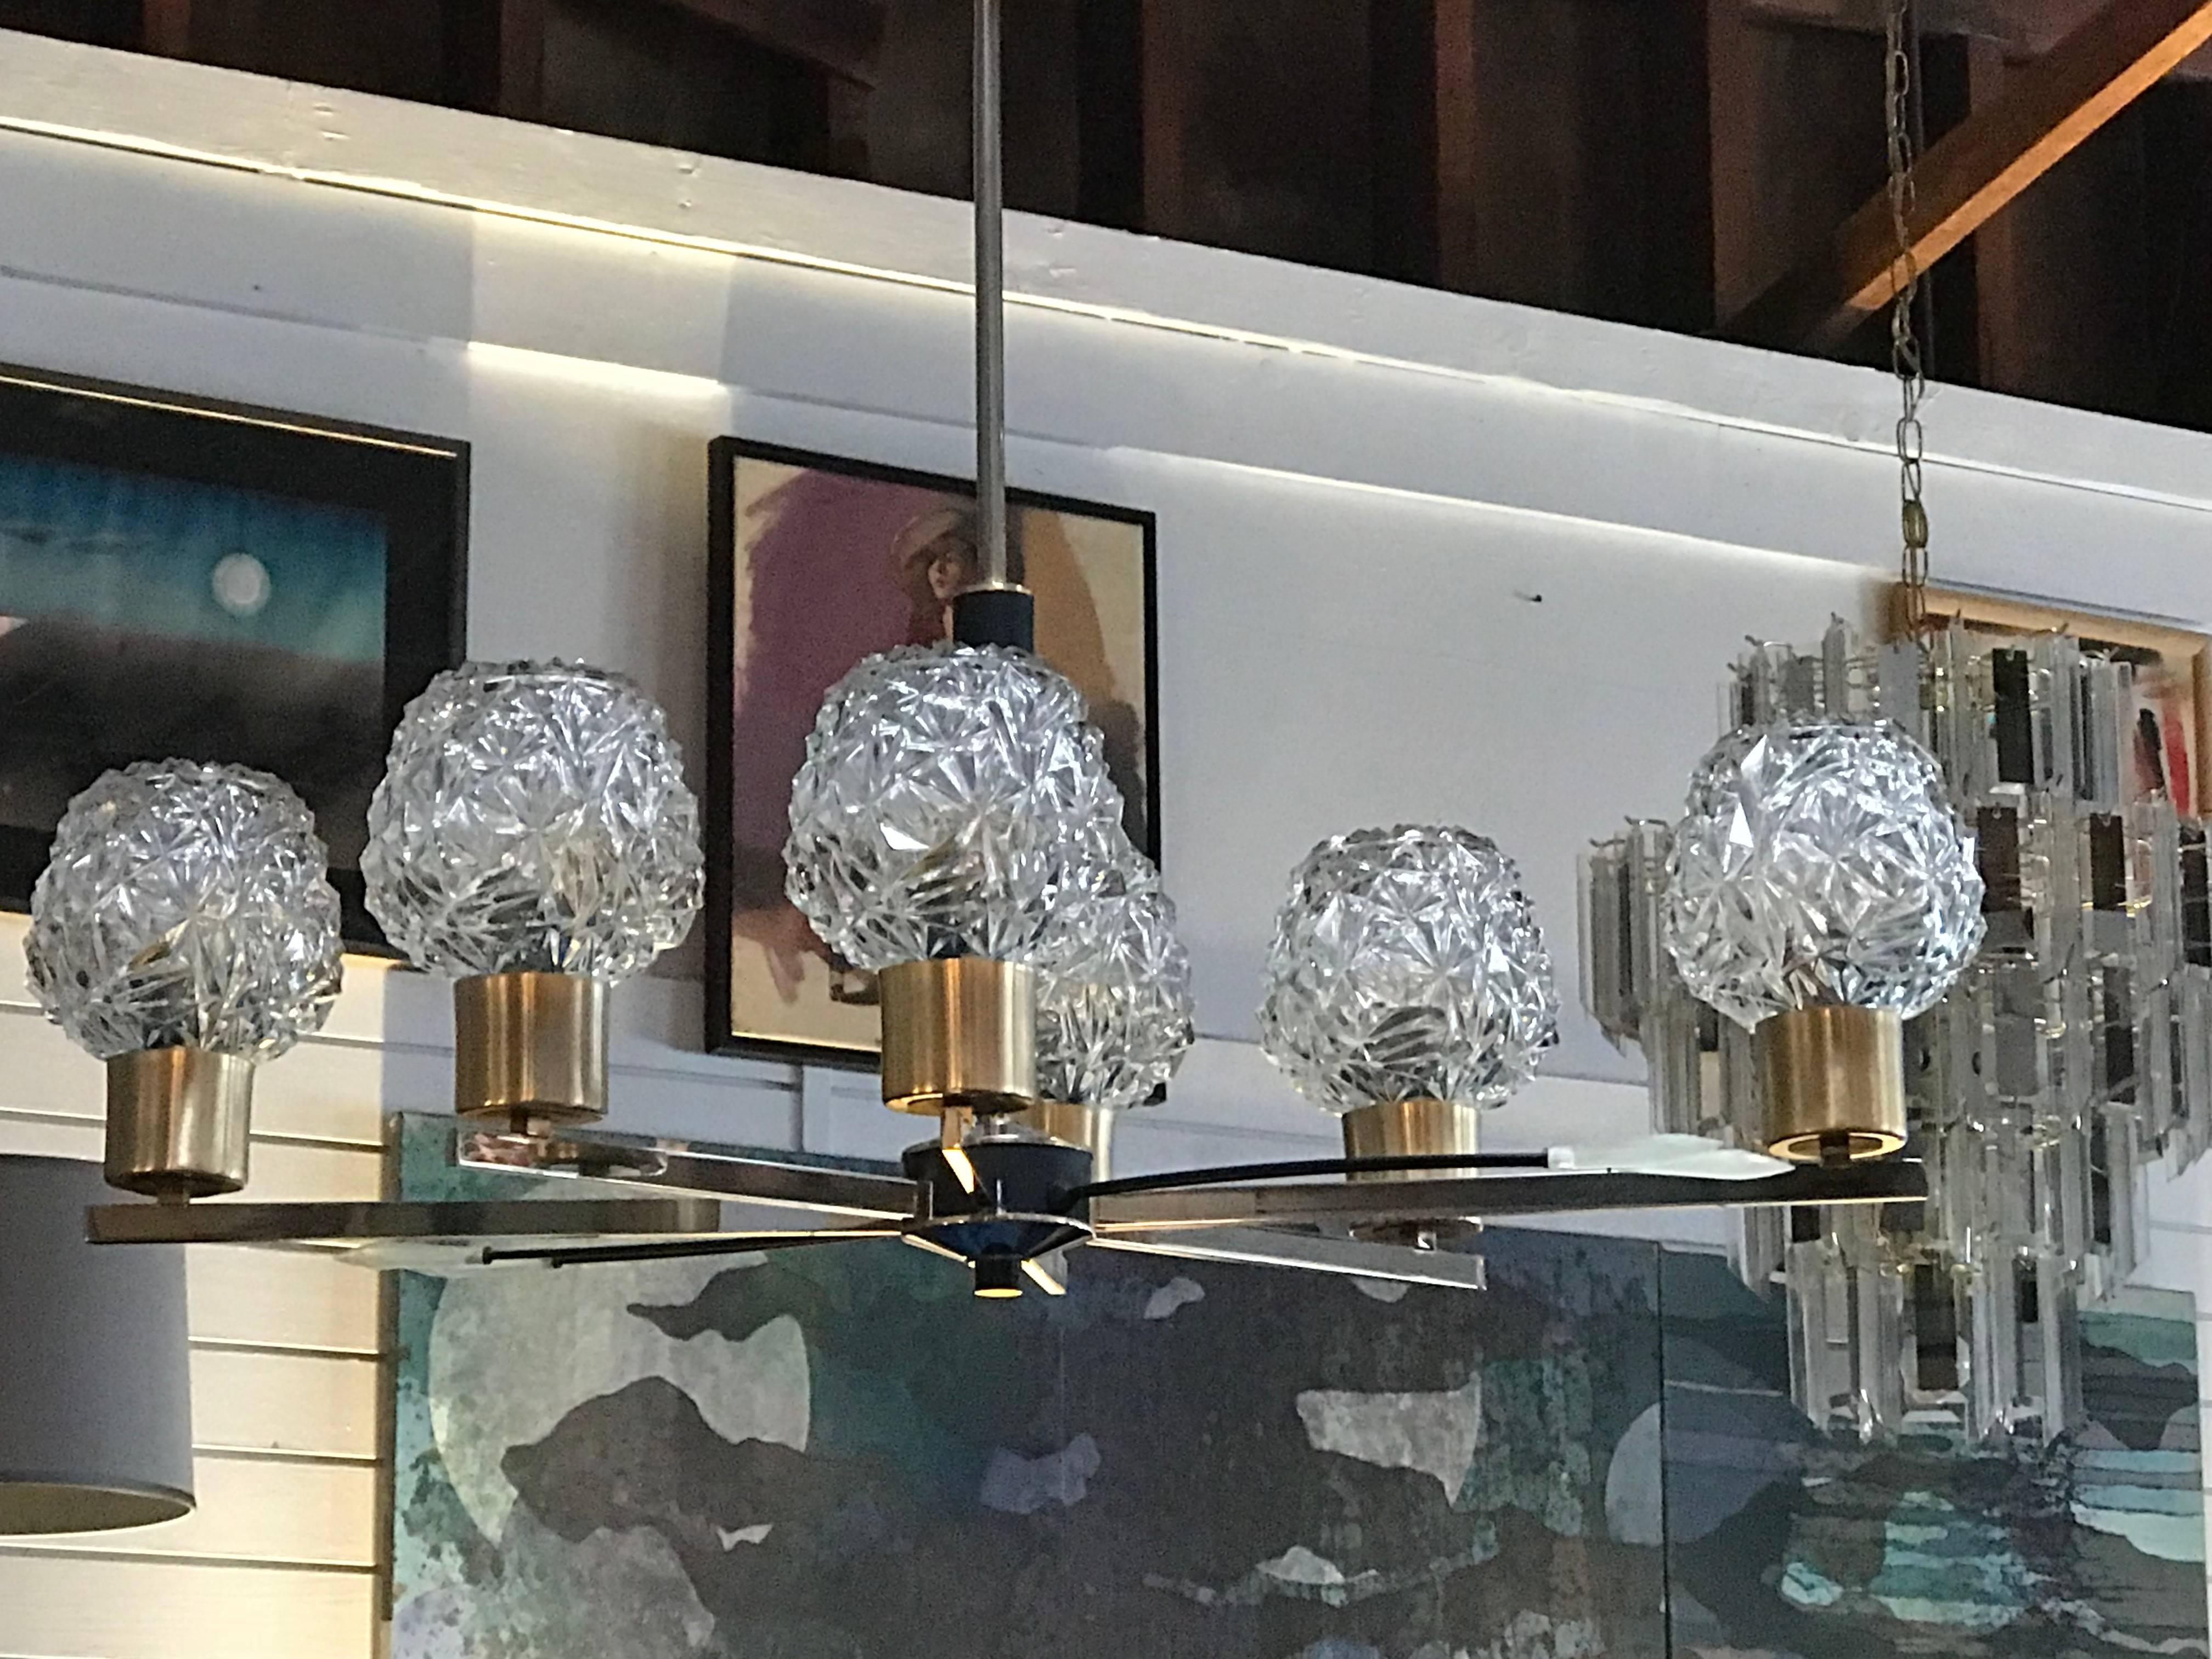 This chandelier features a brass frame with six molded glass globes.